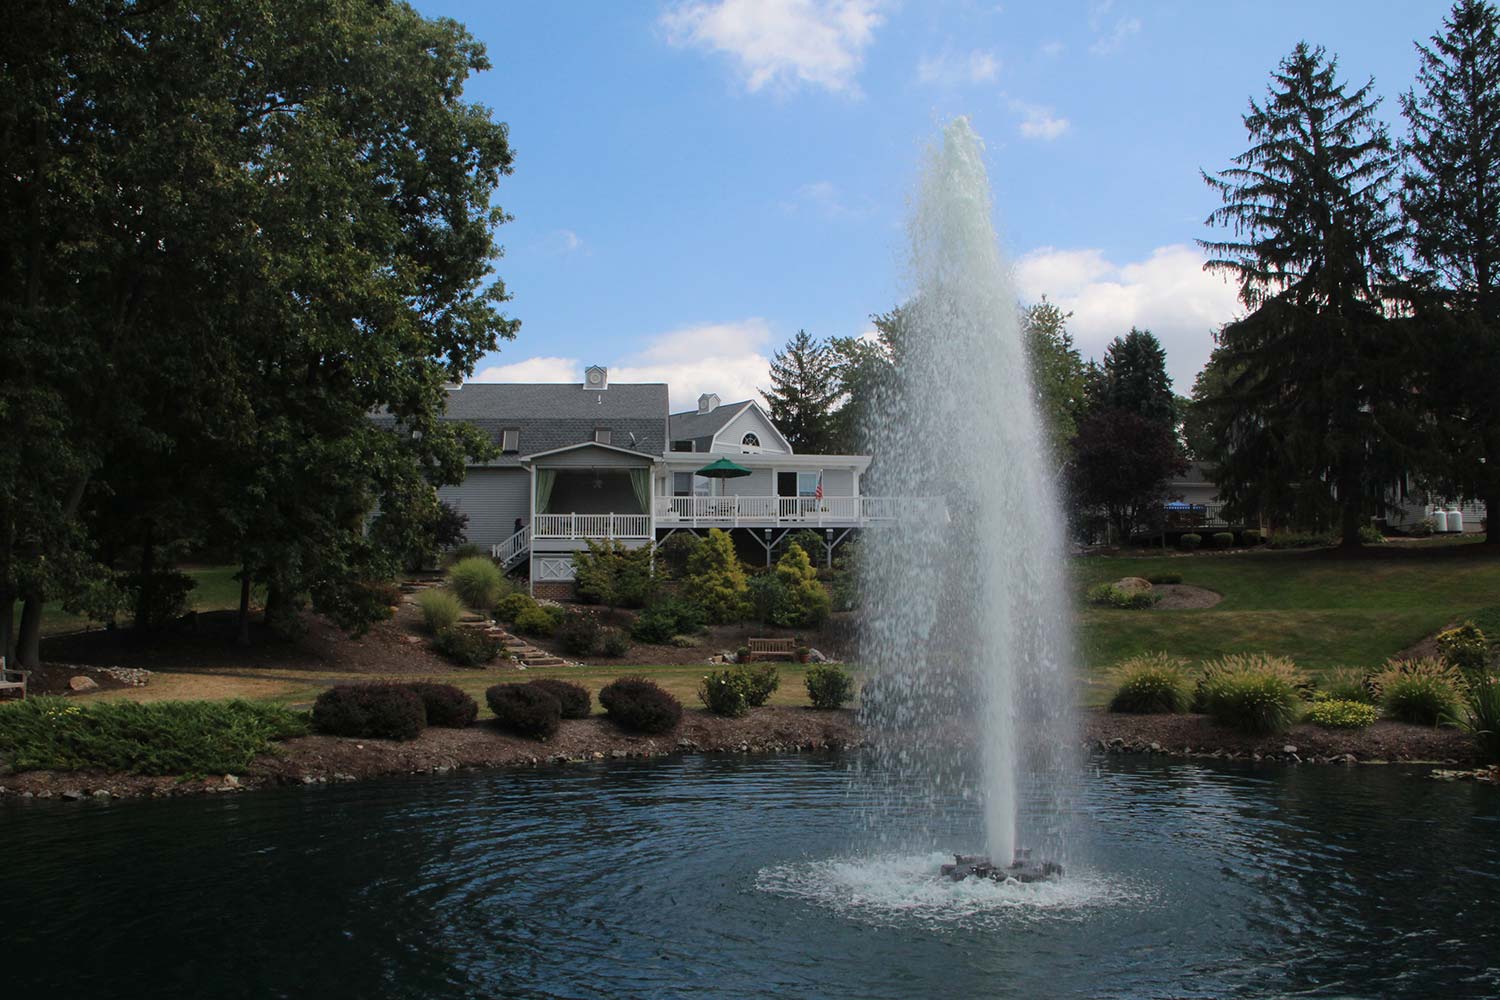 One of Otterbine's Comet Aerating Fountains in a residential area